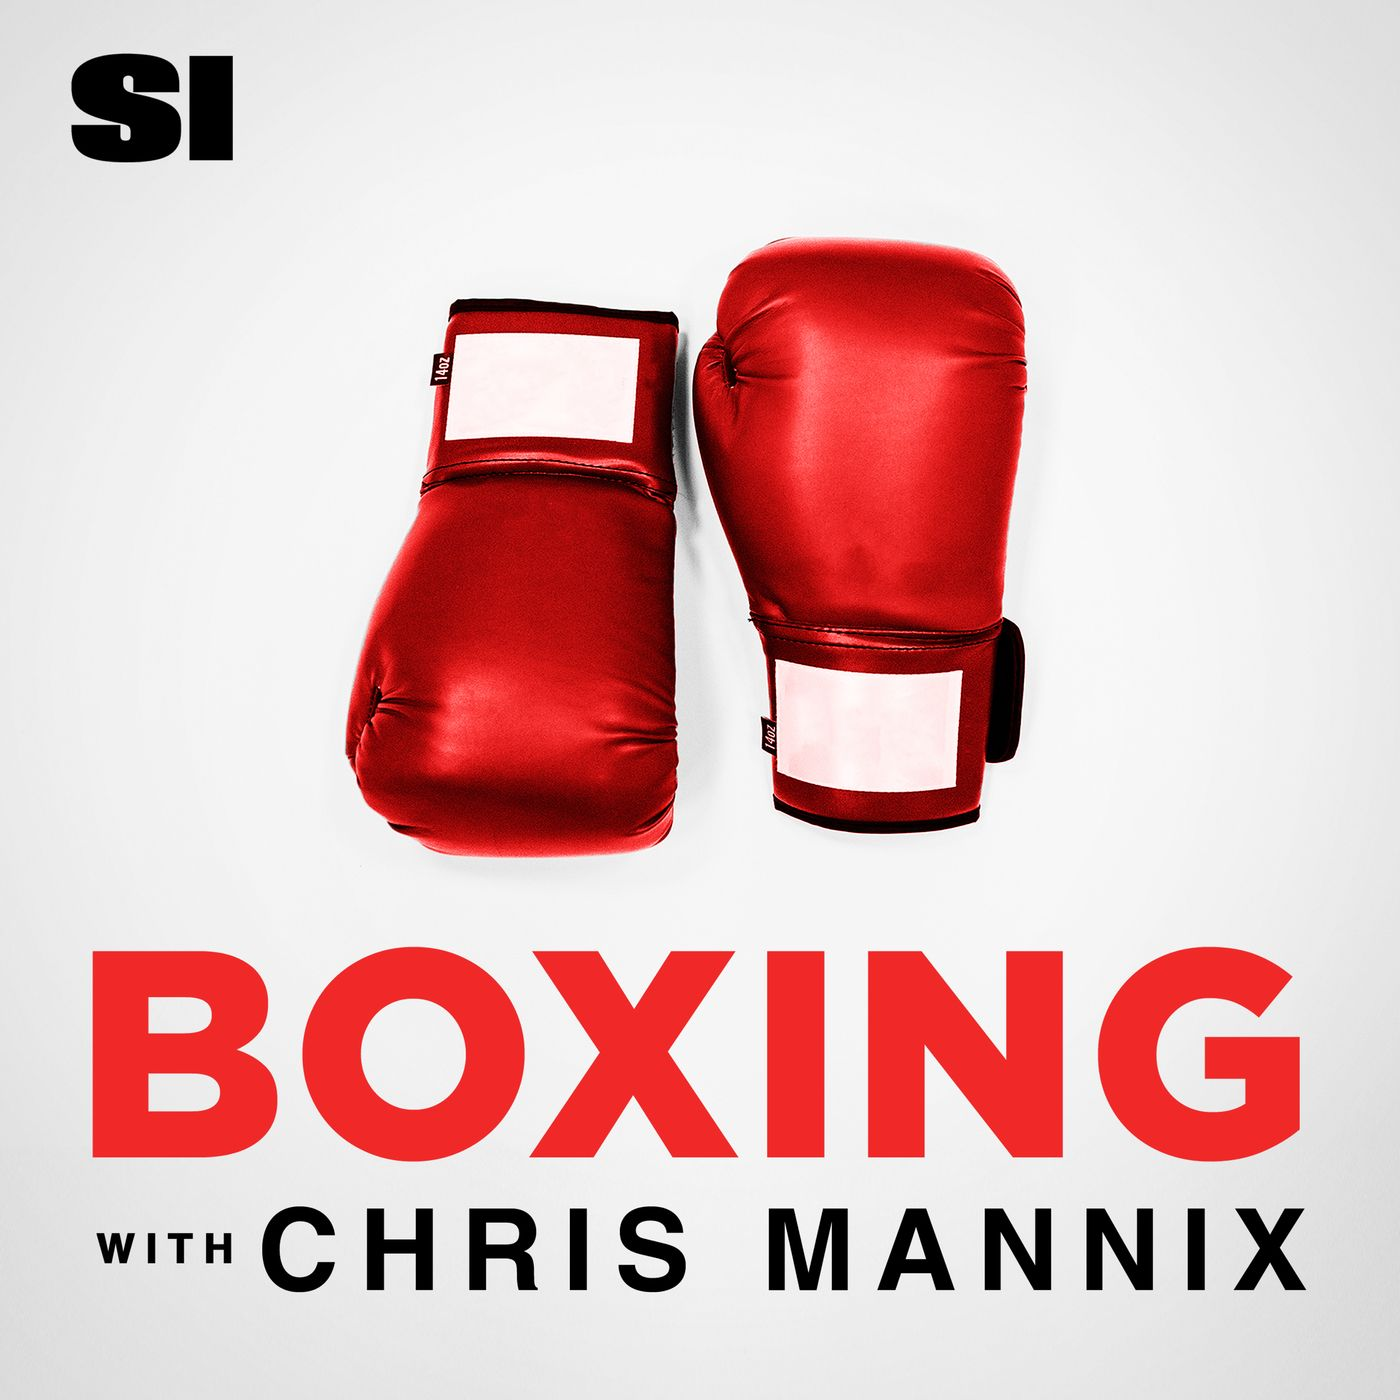 A highlight from Boxing with Chris Mannix - Shakur misses weight, Joyce-Parker, and is Bam the Fighter of The Year